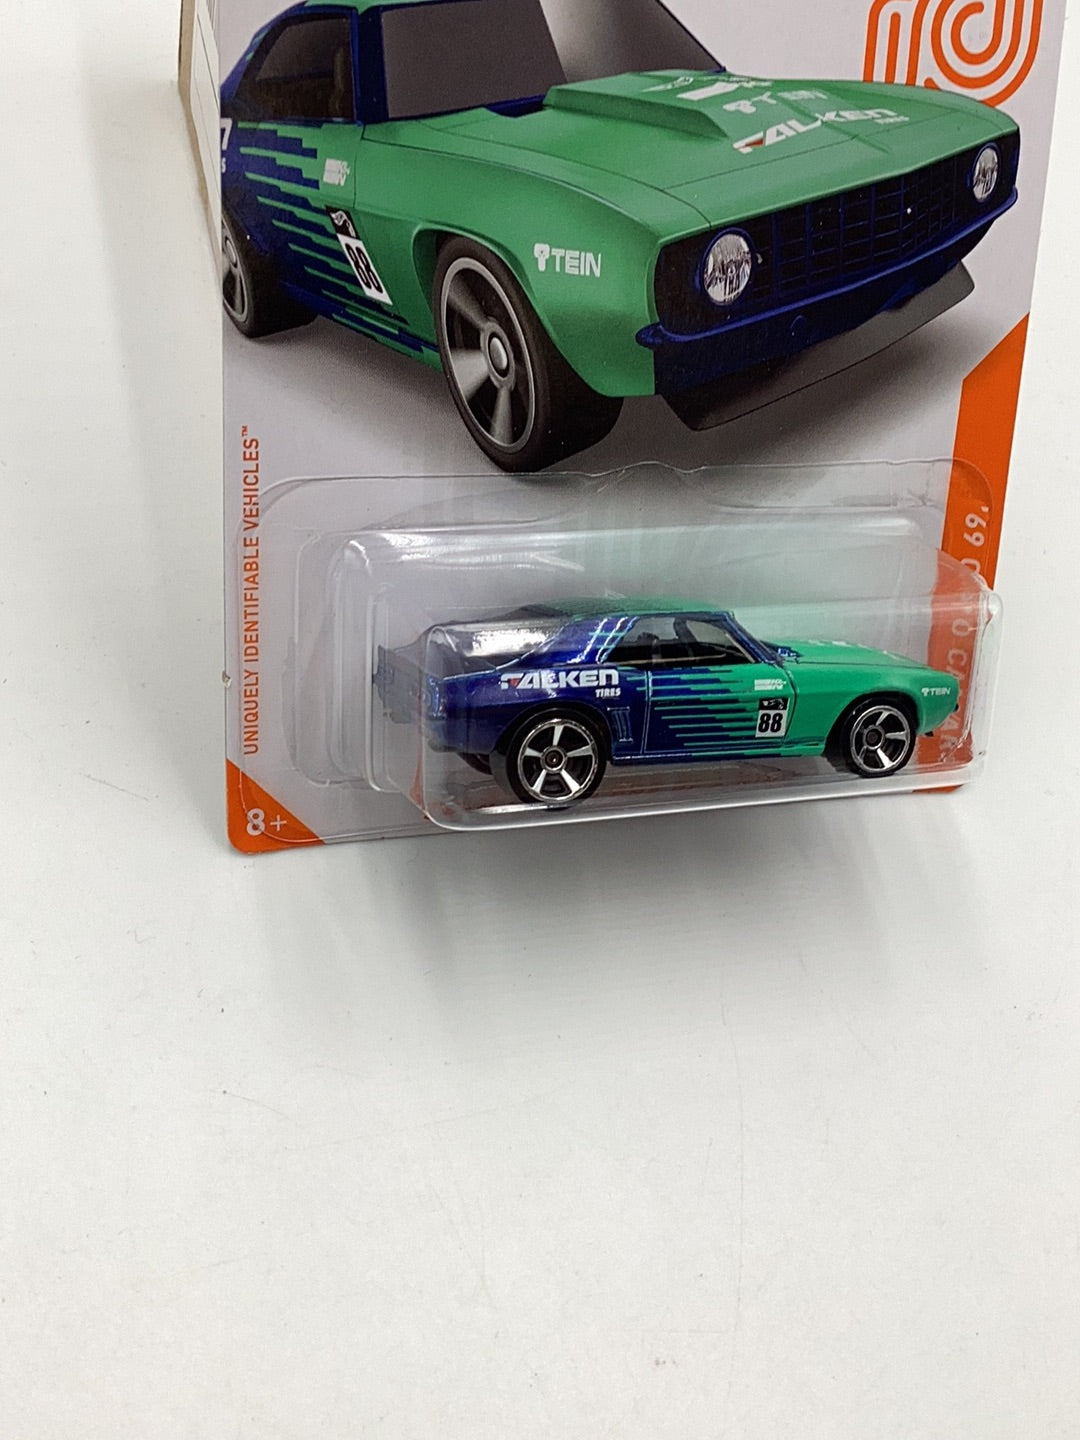 2021 Hot Wheels ID #5 69 Copo Camaro chase Falken 5/8 with protector